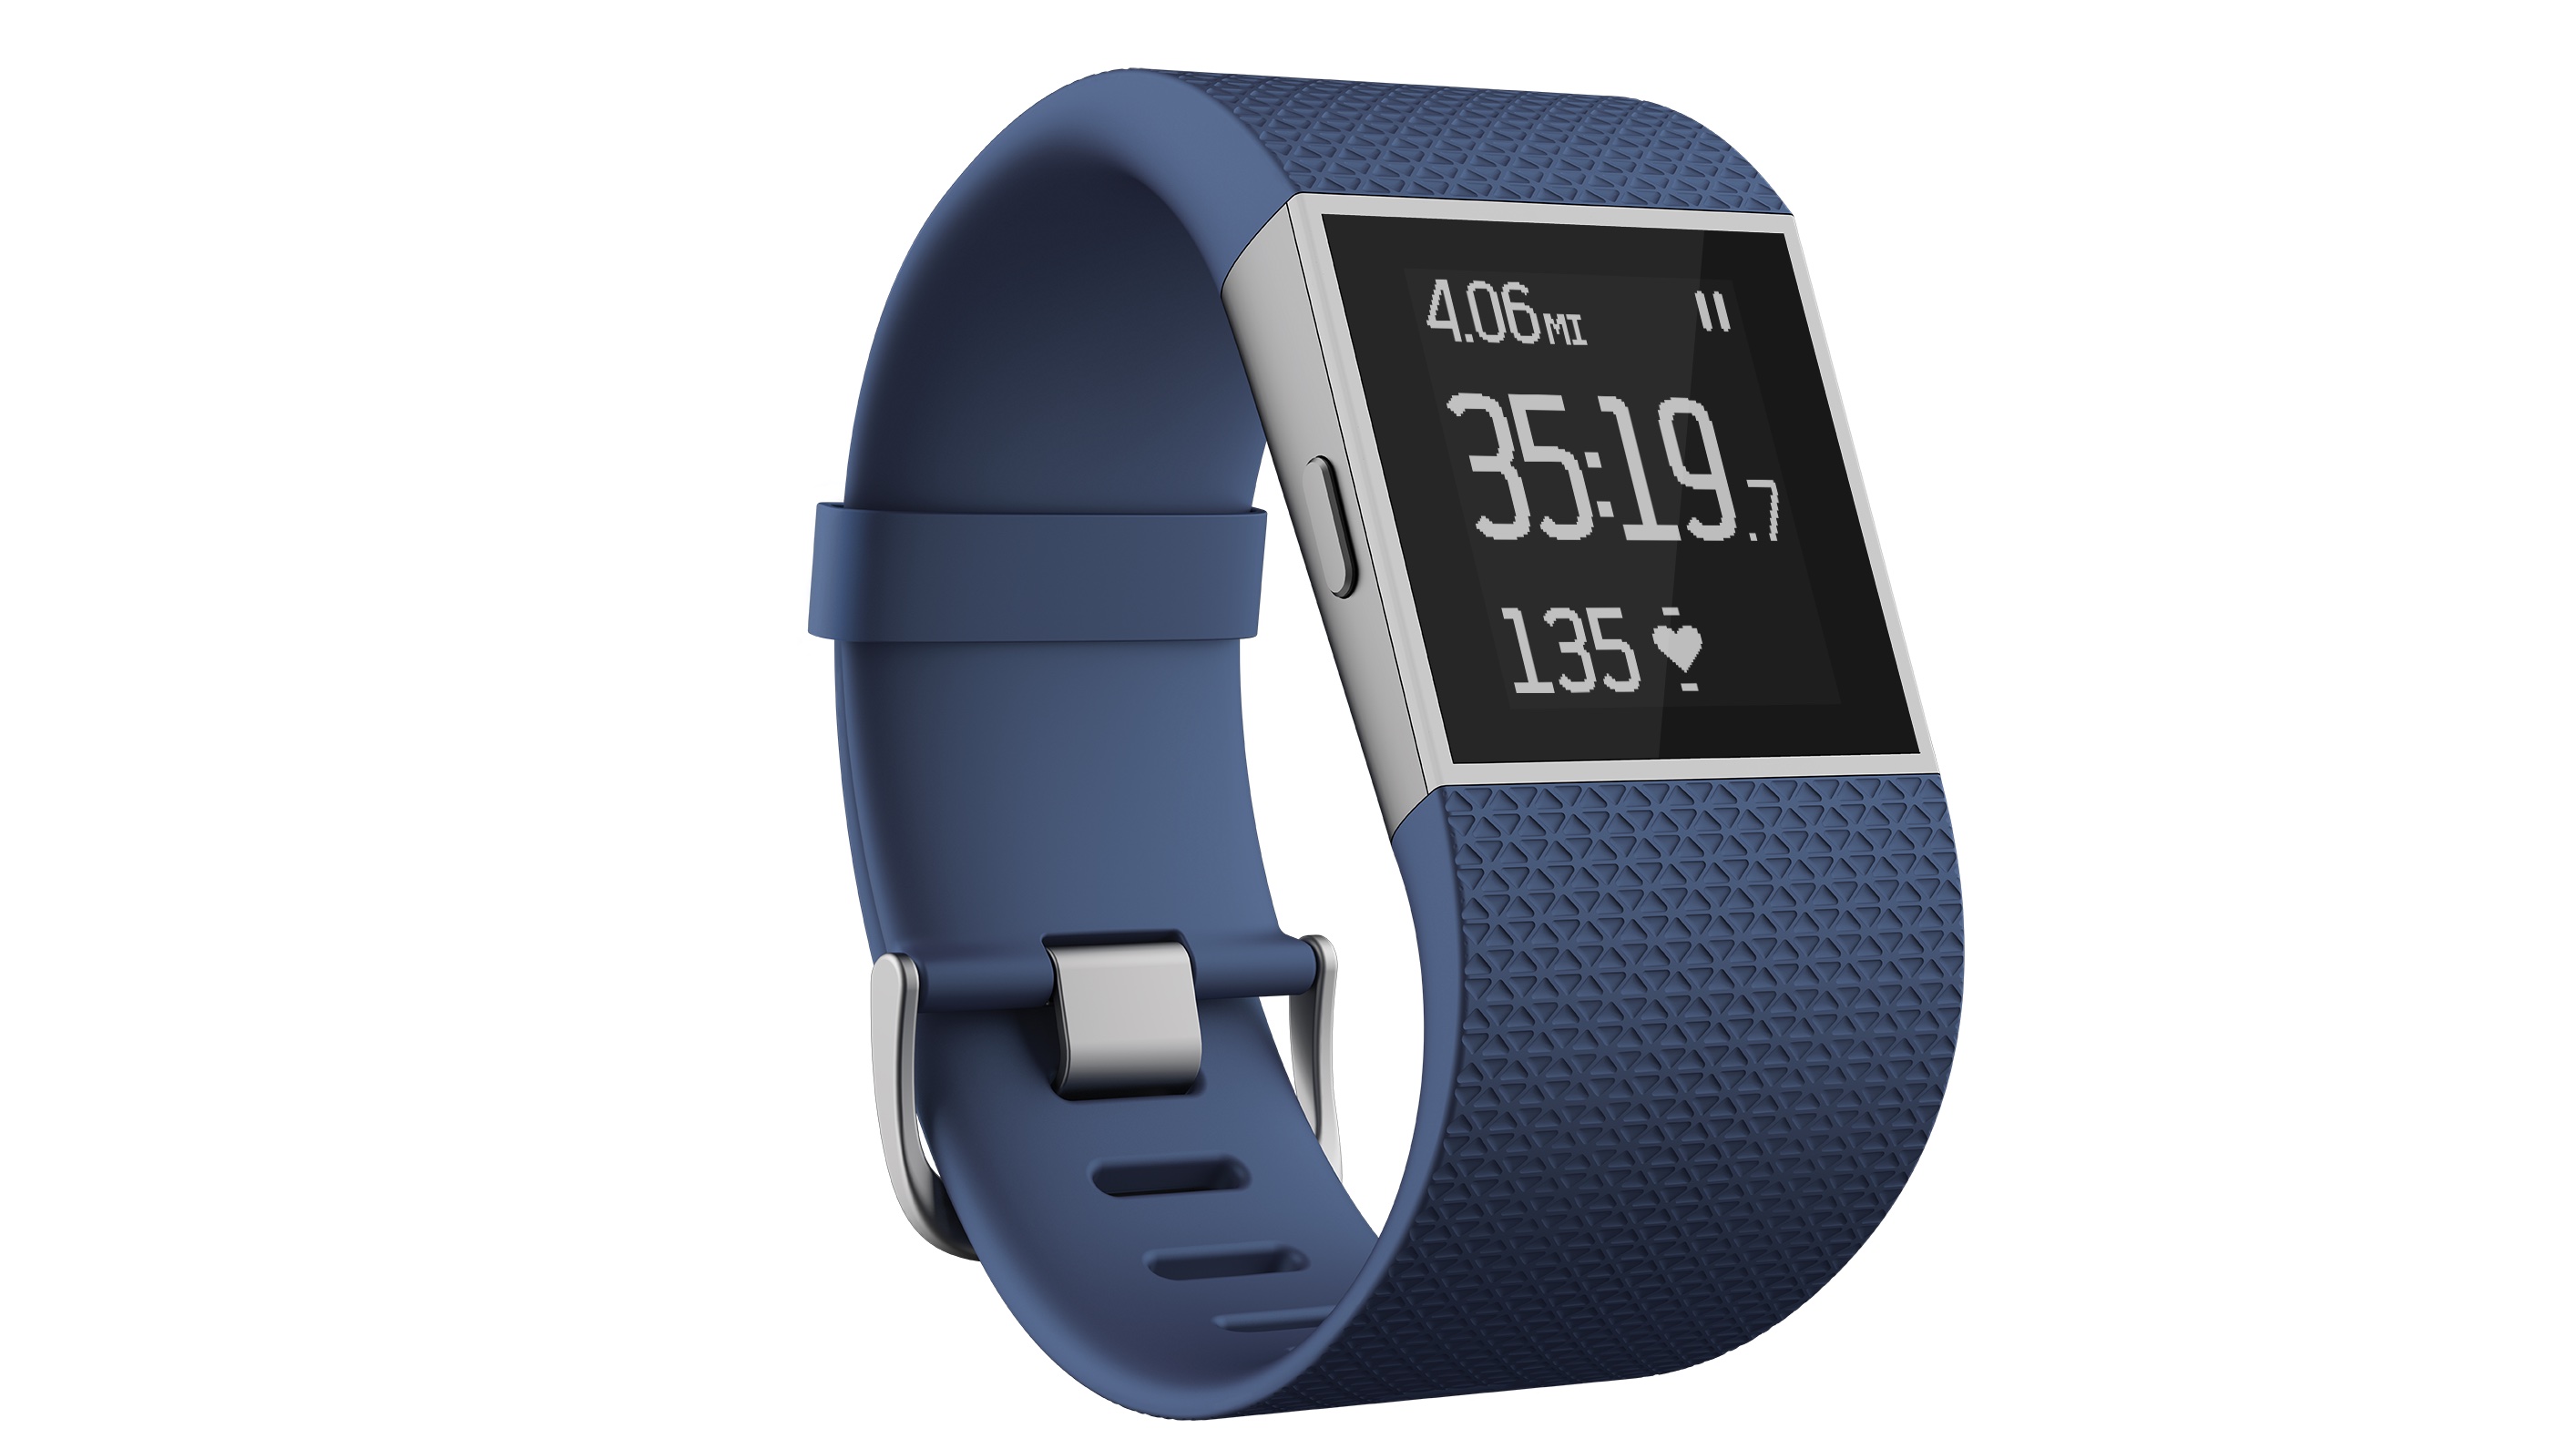 Fitbit Surge Photos Image And Wallpaper Mouthshut